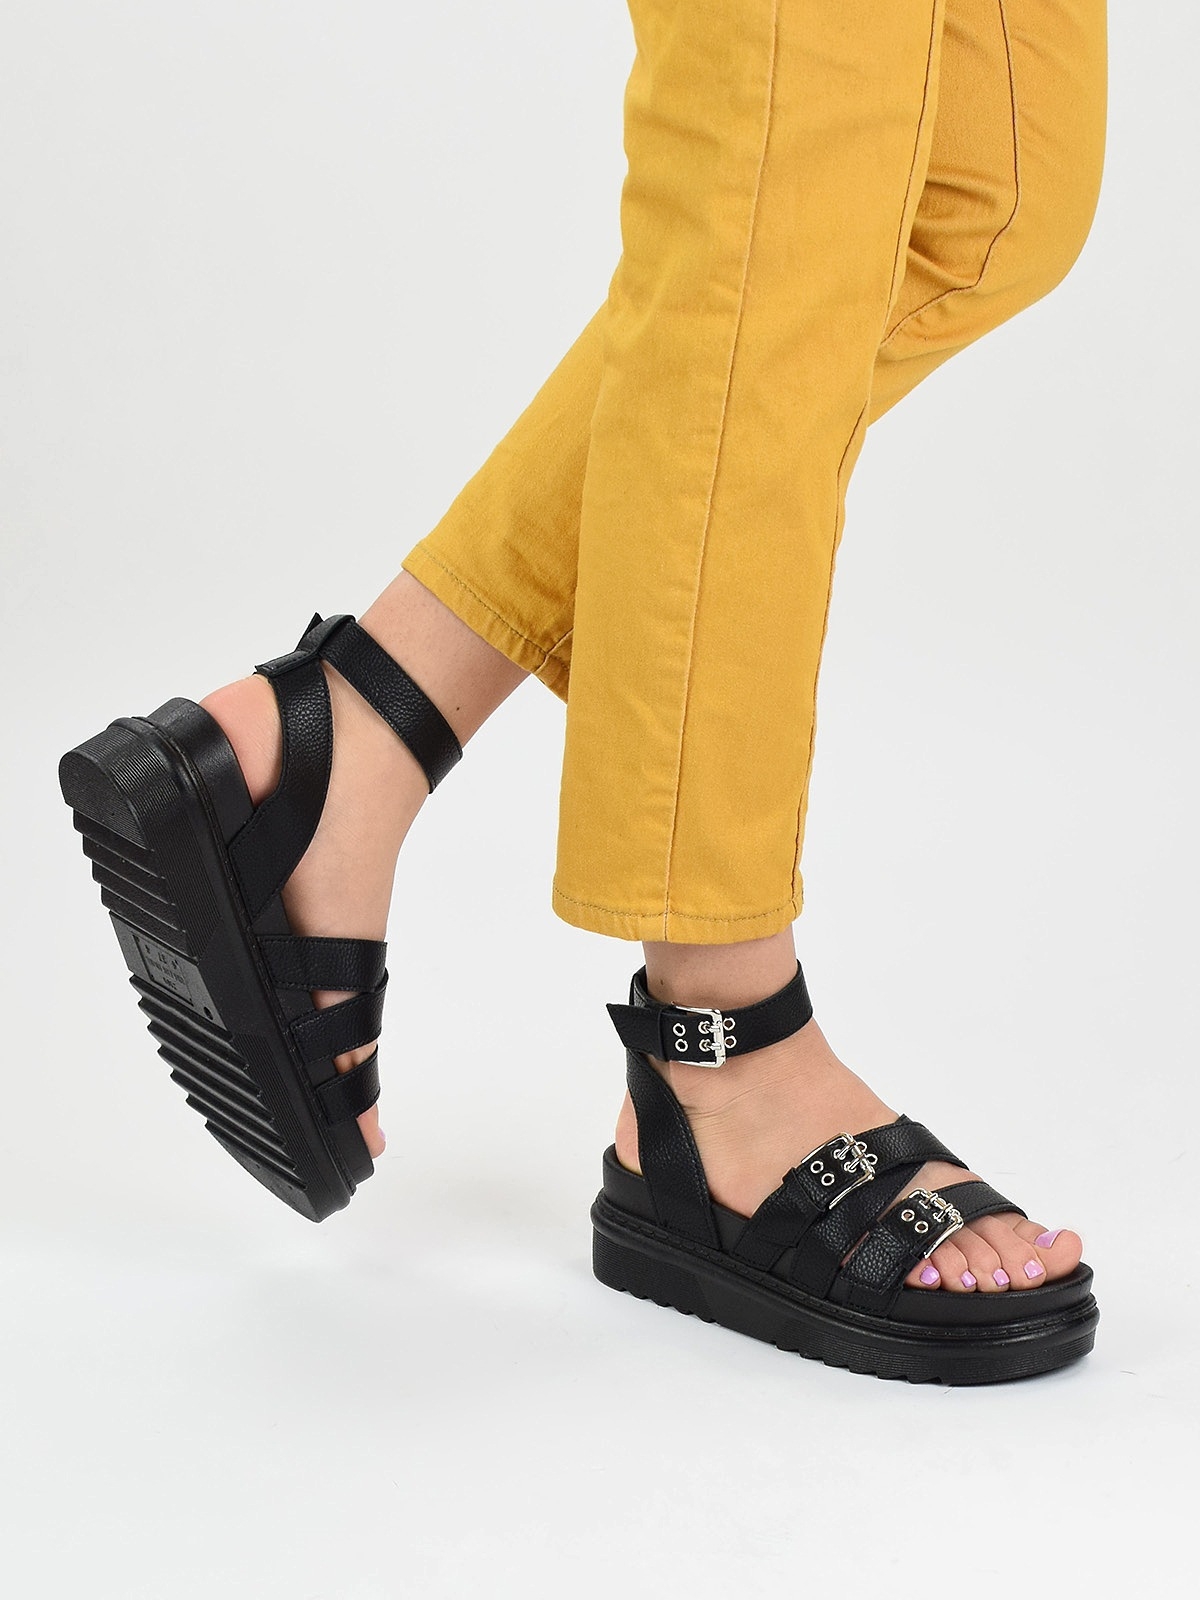 Chunky flat sandals with buckle straps in black